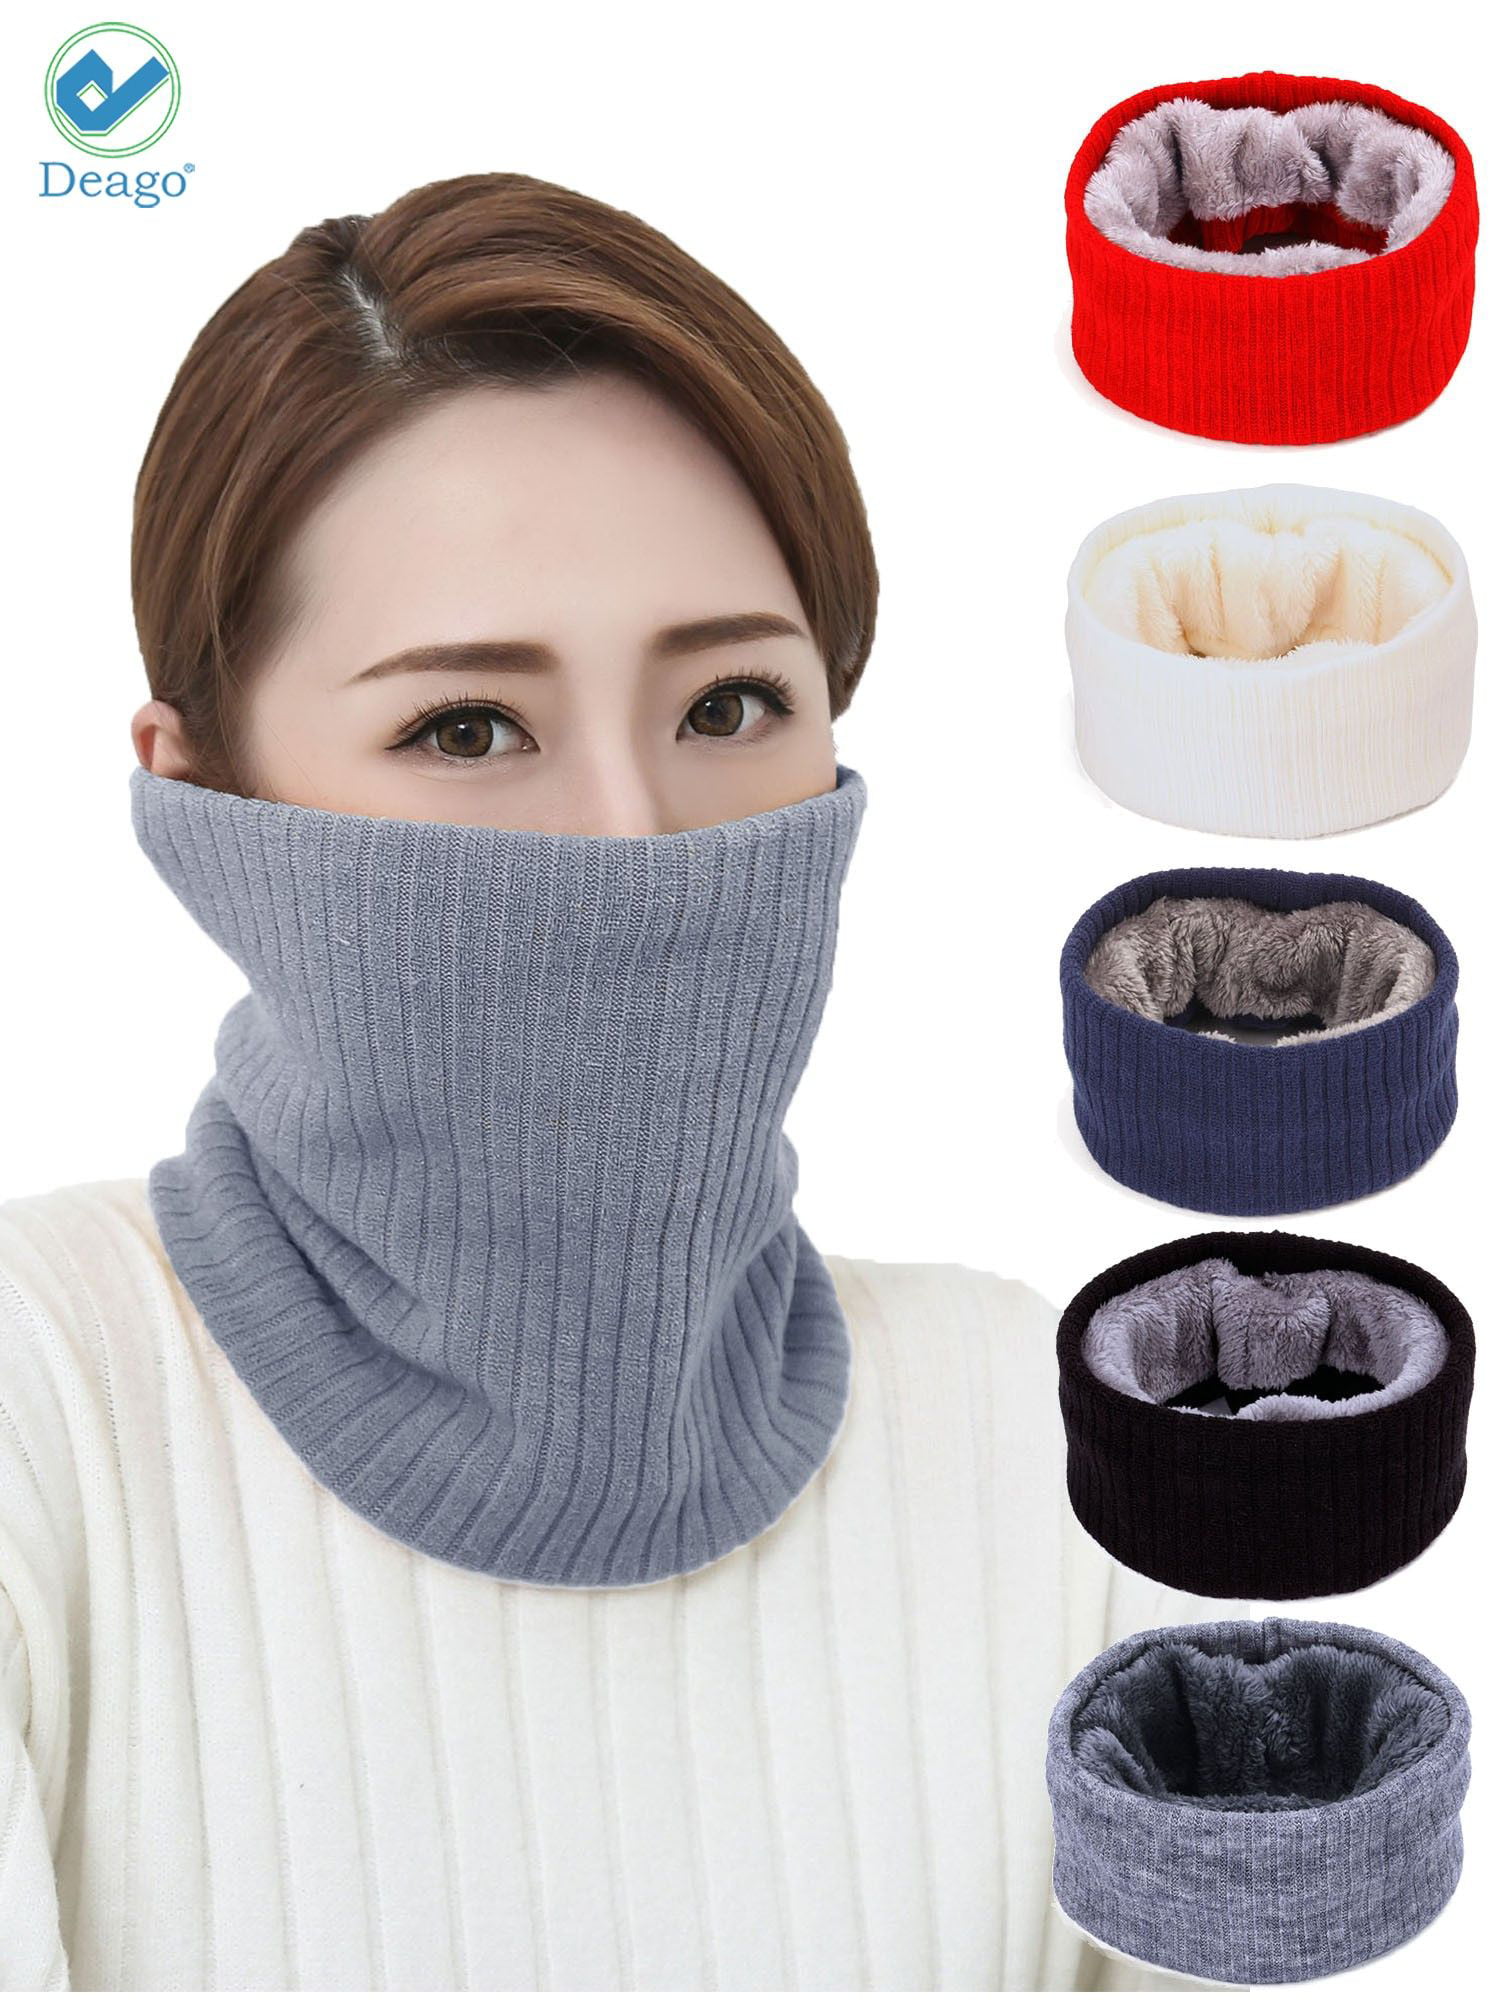 Scarf Winter Fall Double-Layer Solid Color Neck Warm Knit Fleece Lined Circle Loop Scarves for Women Men Kids 